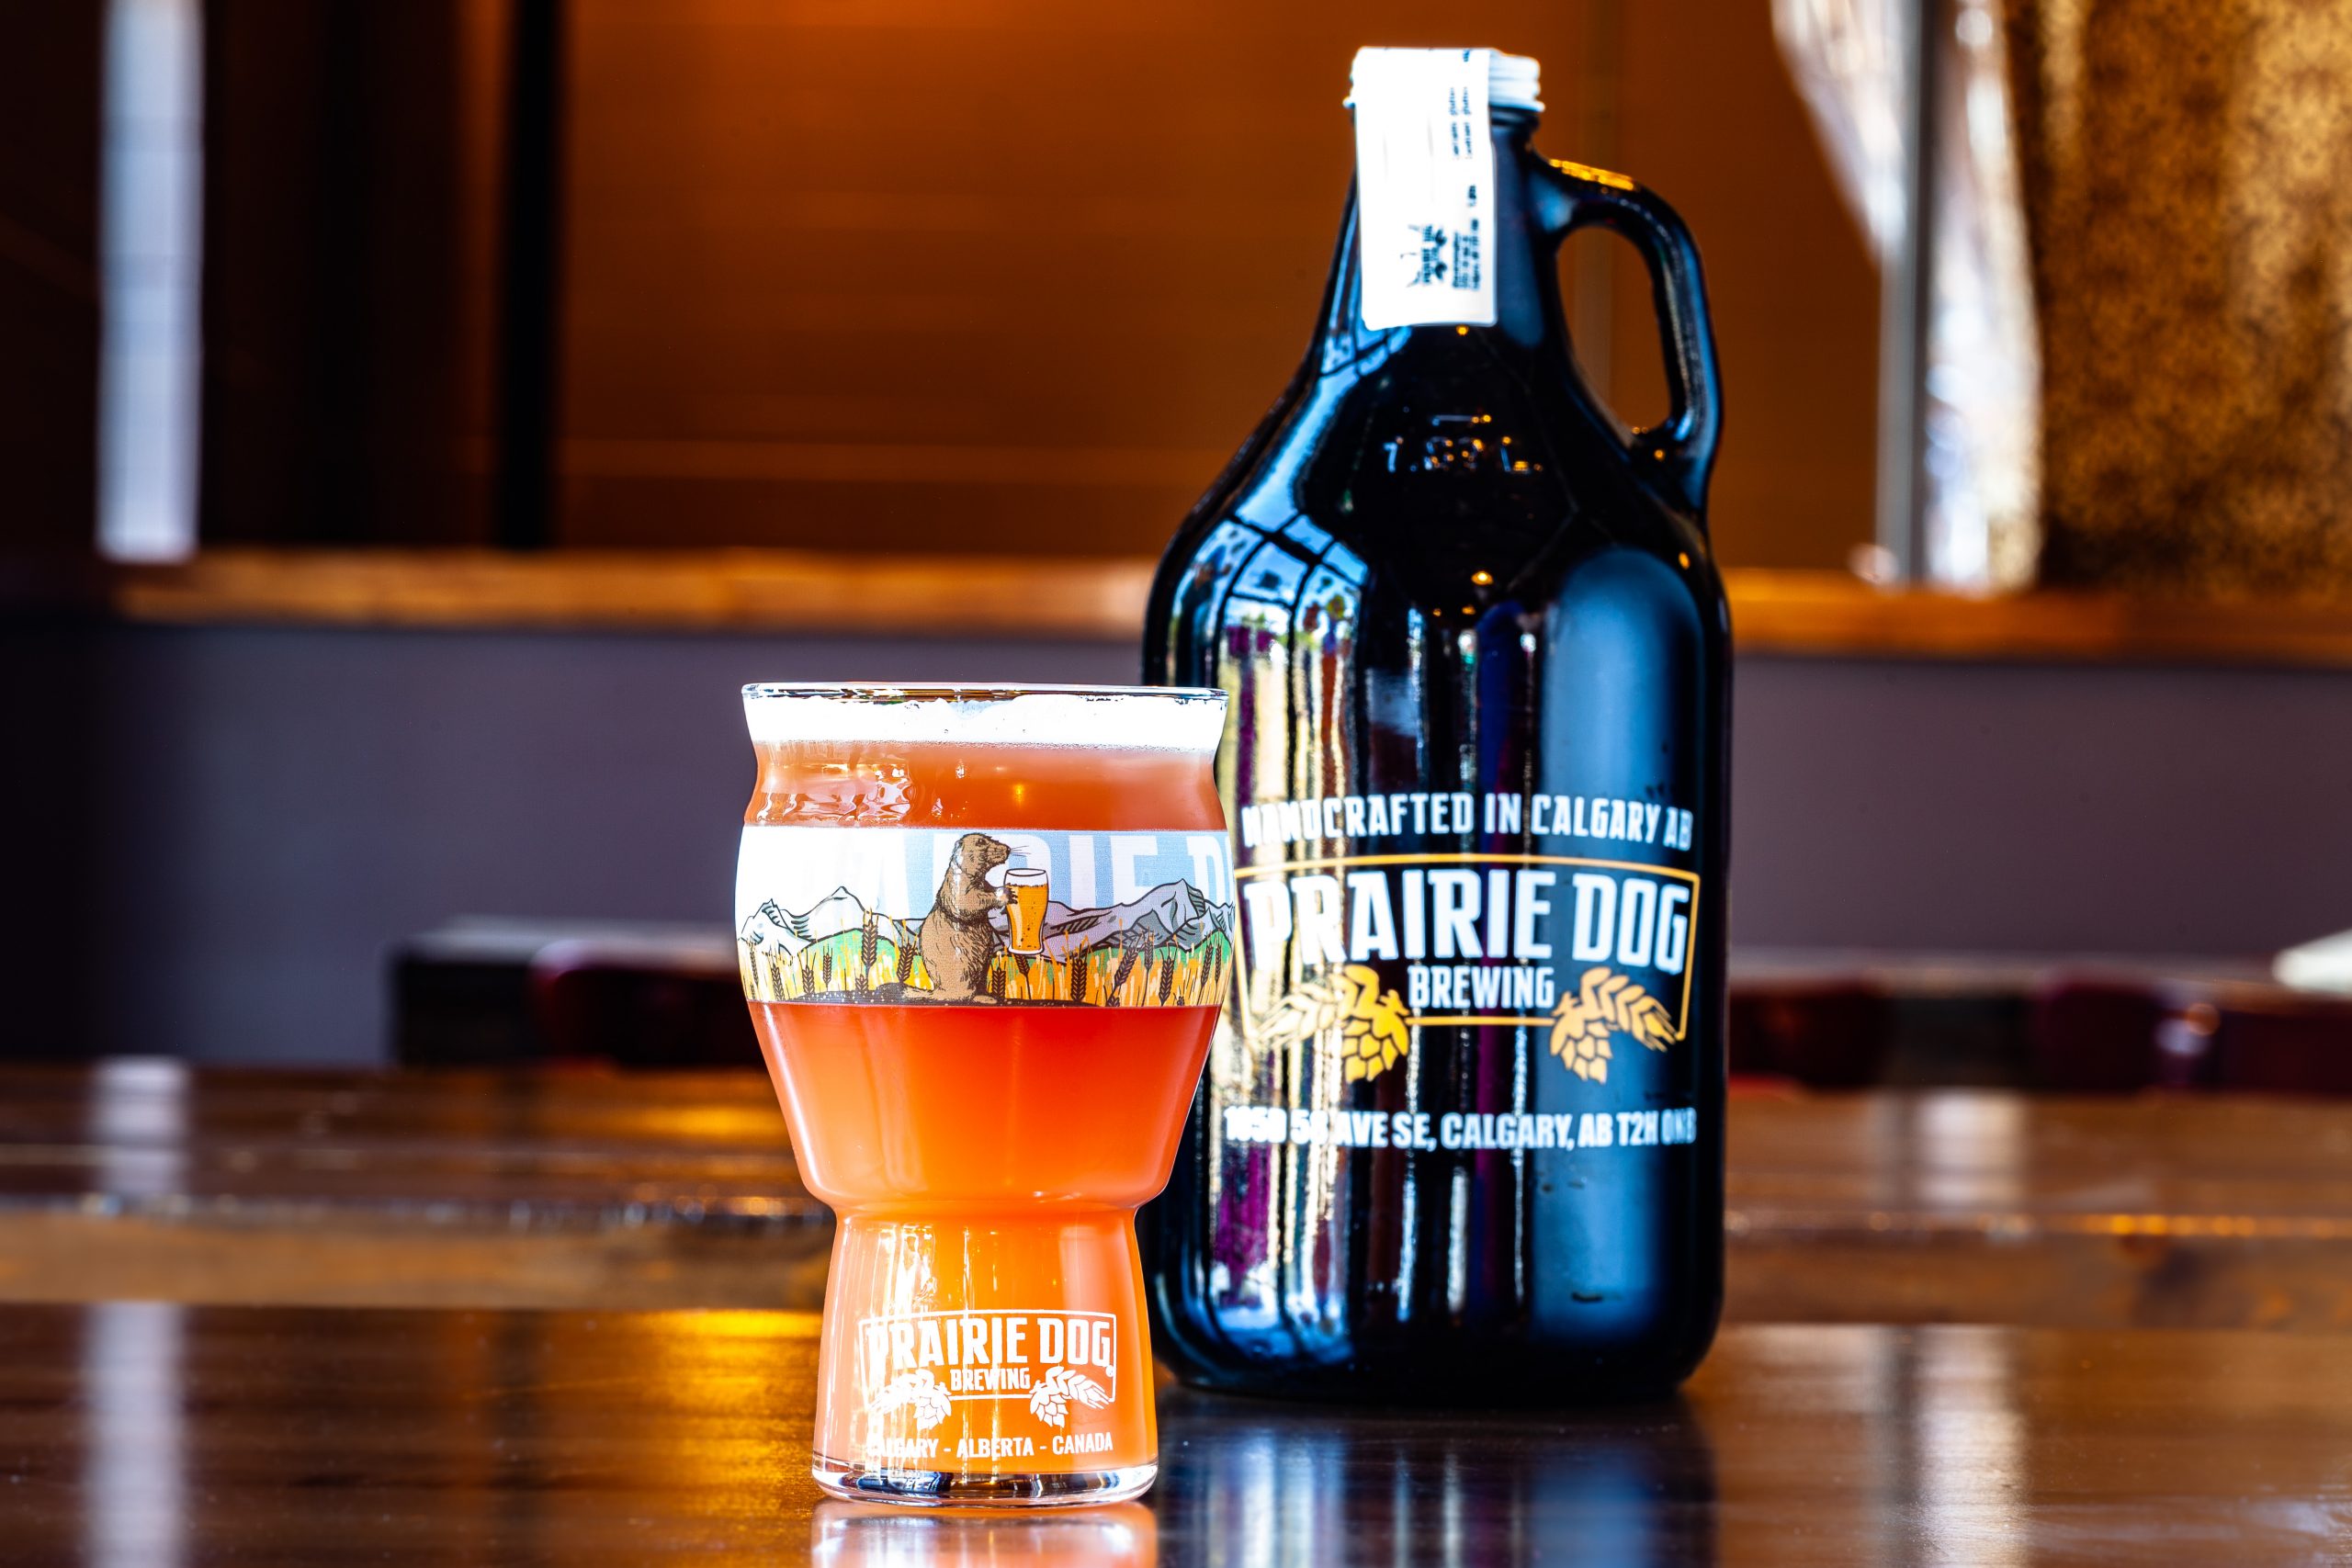 Prairie Dog Brewing and Hubtown Brewery's Berry Manly collaboration fruited Belgian-style blonde ale in a branded 16-oz US pint glass with a 64-oz branded growler in the background.